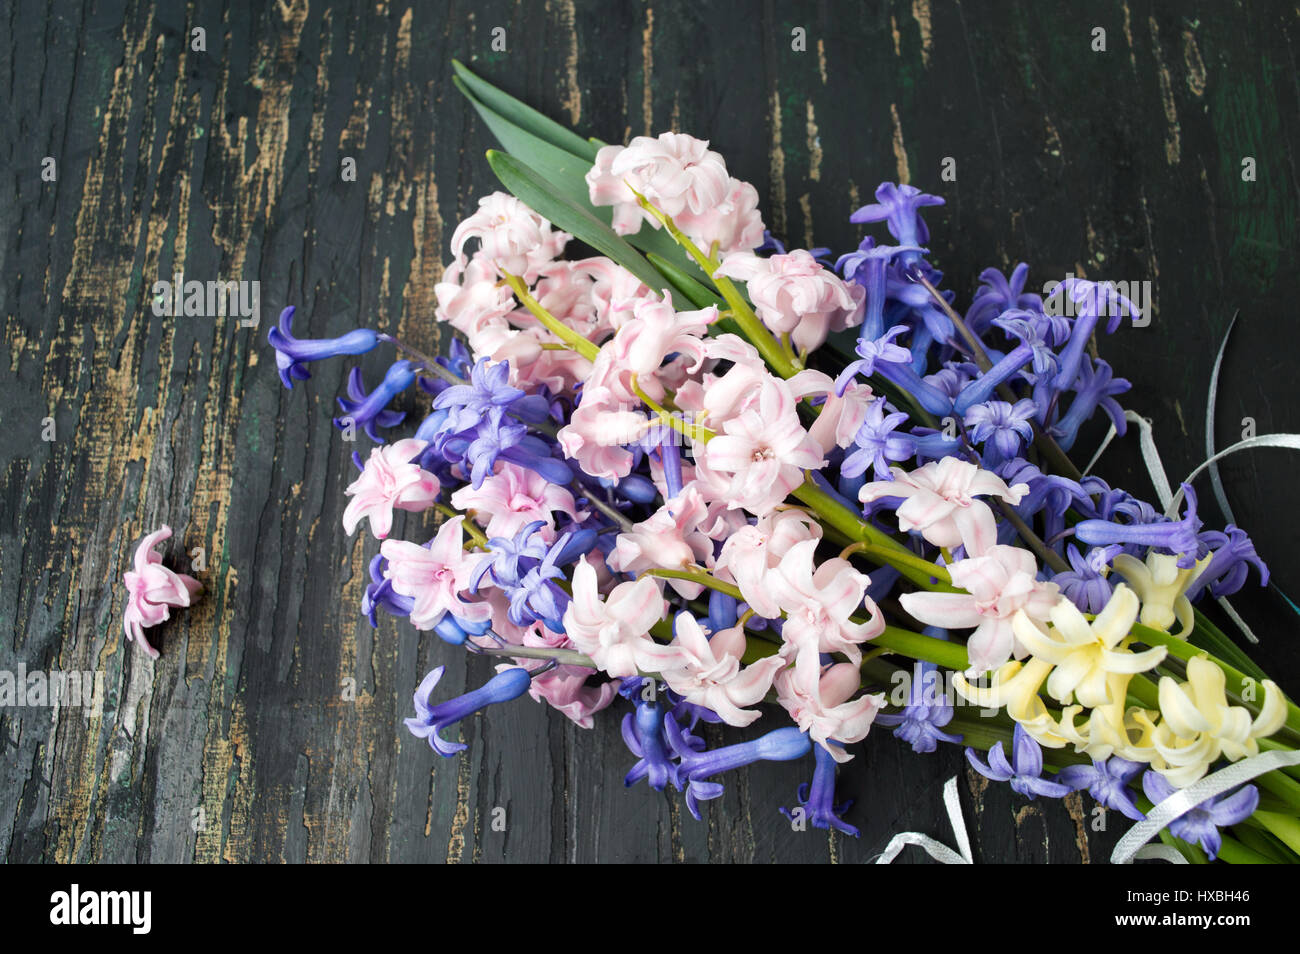 Colorful hyacinth flowers on a wooden table Stock Photo